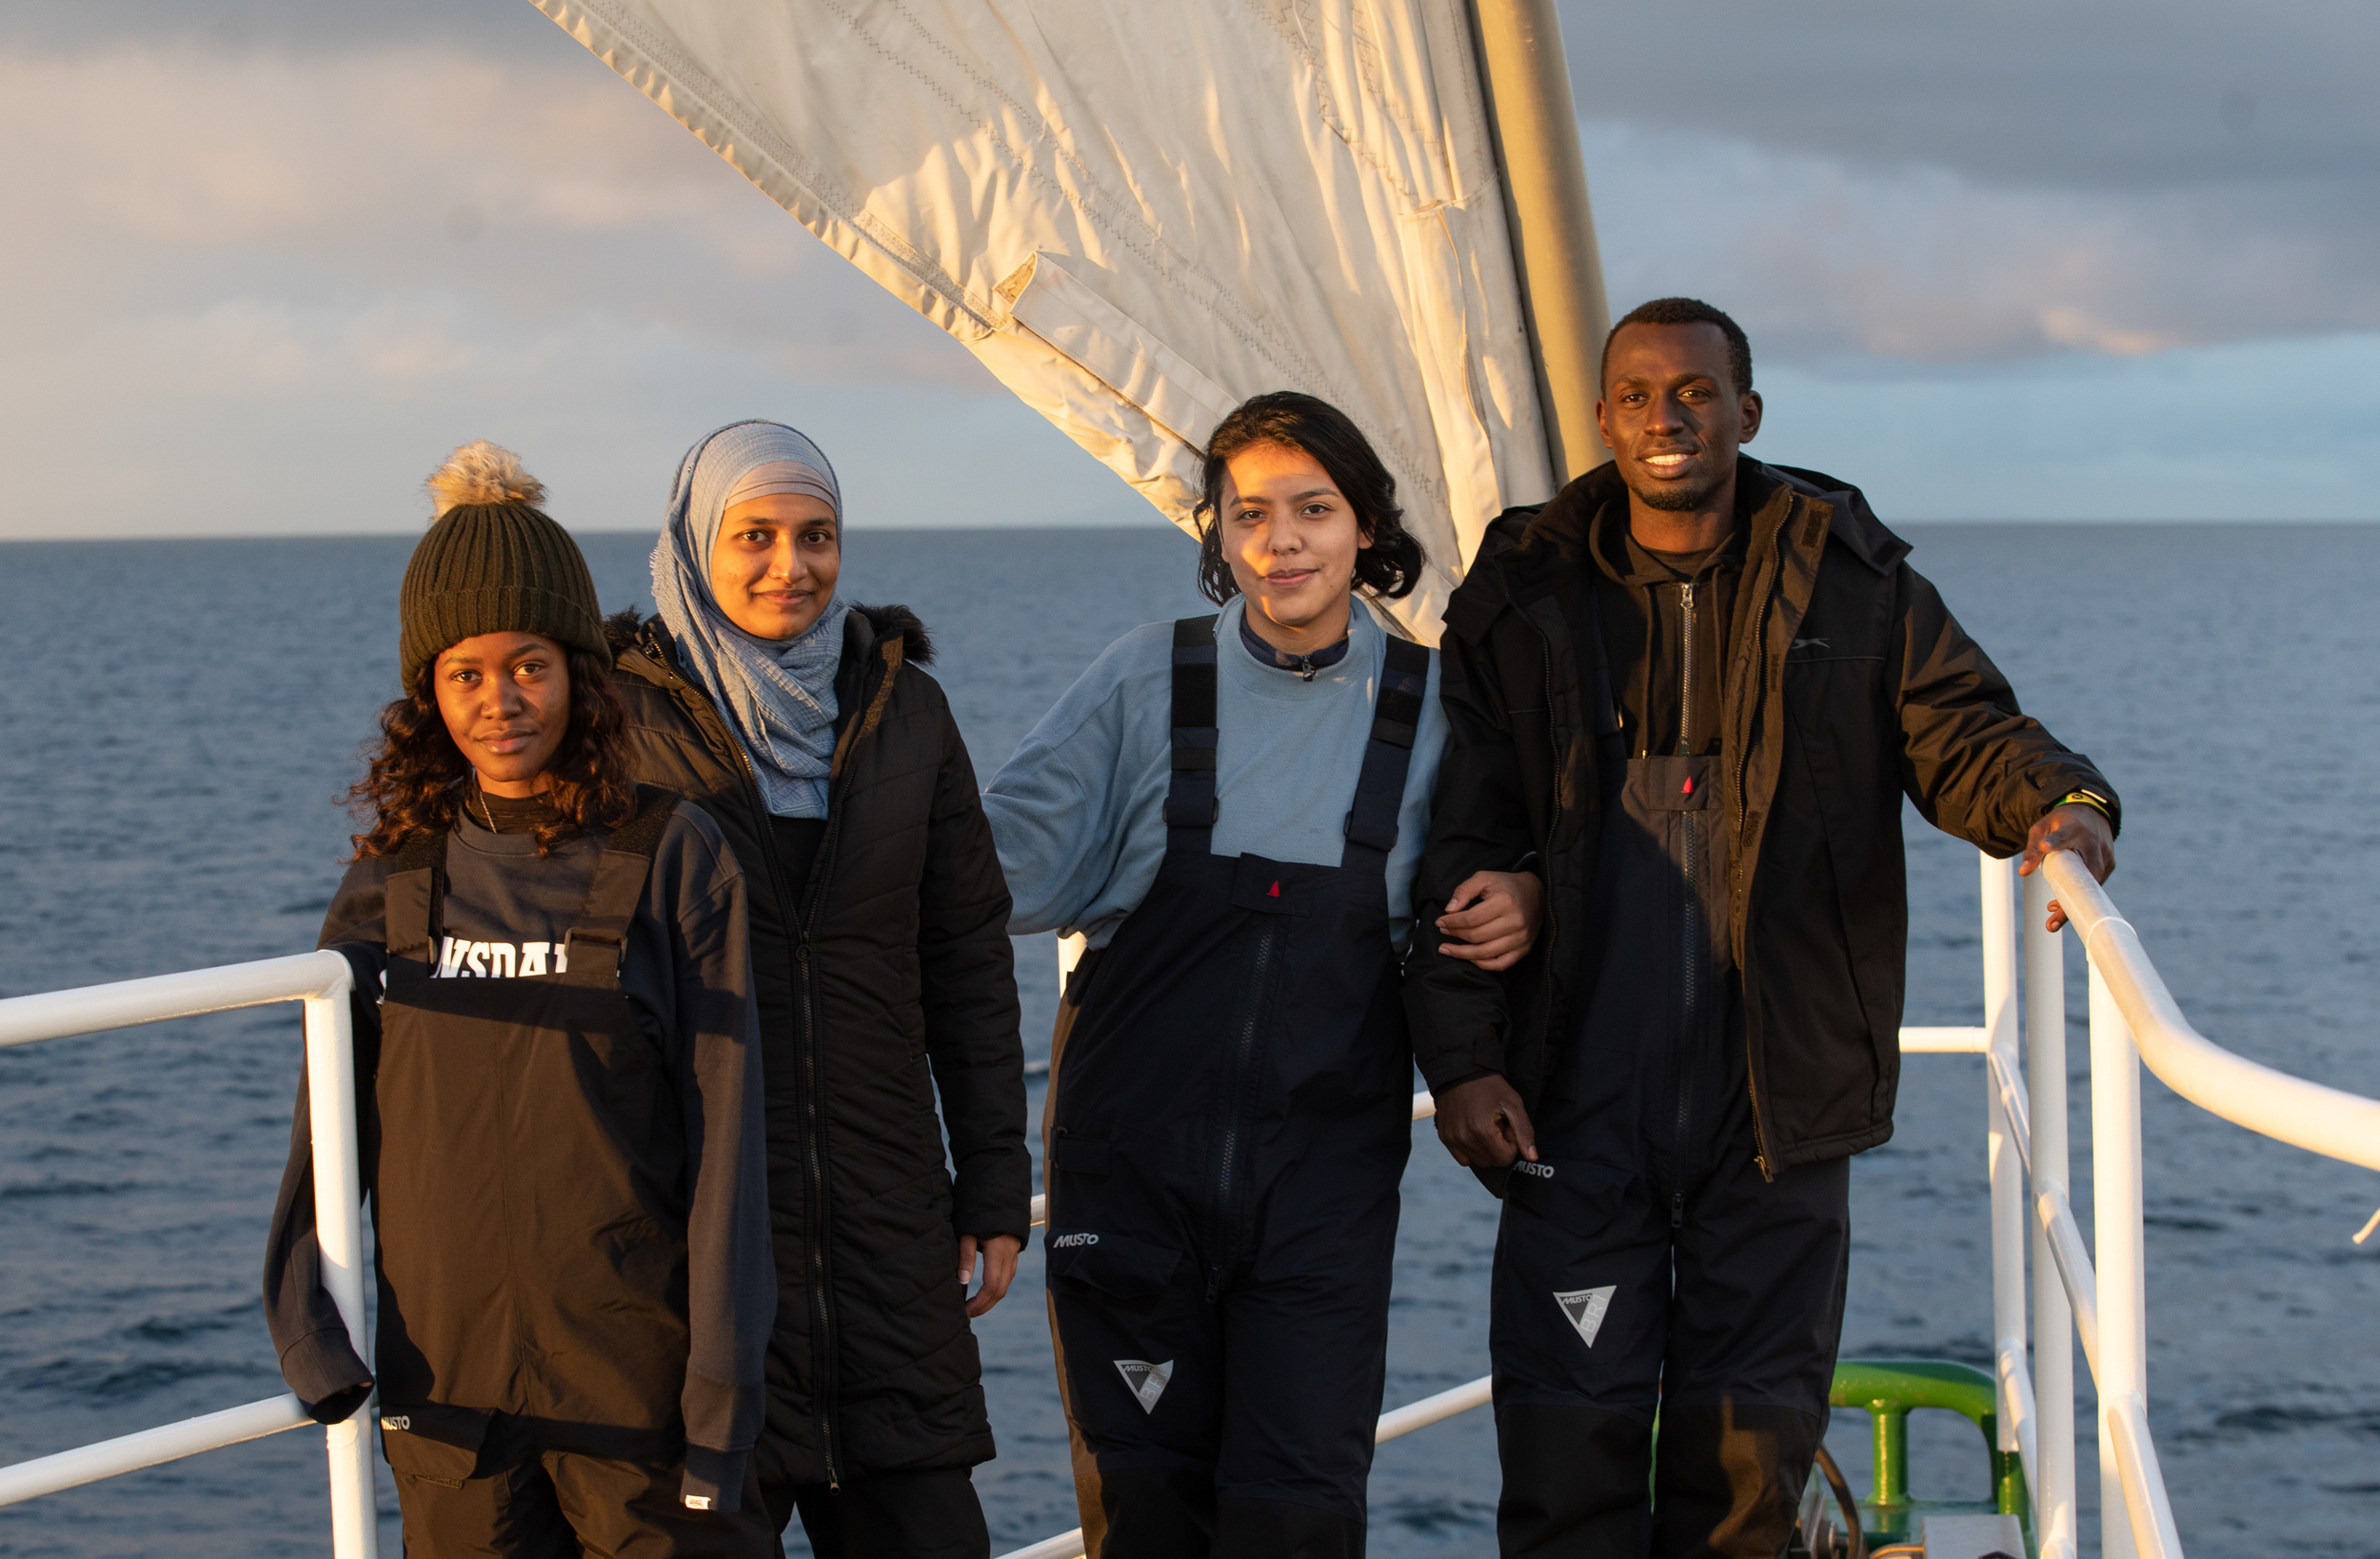 Four young activists stand on the deck of a ship in warm evening light, smiling at the camera